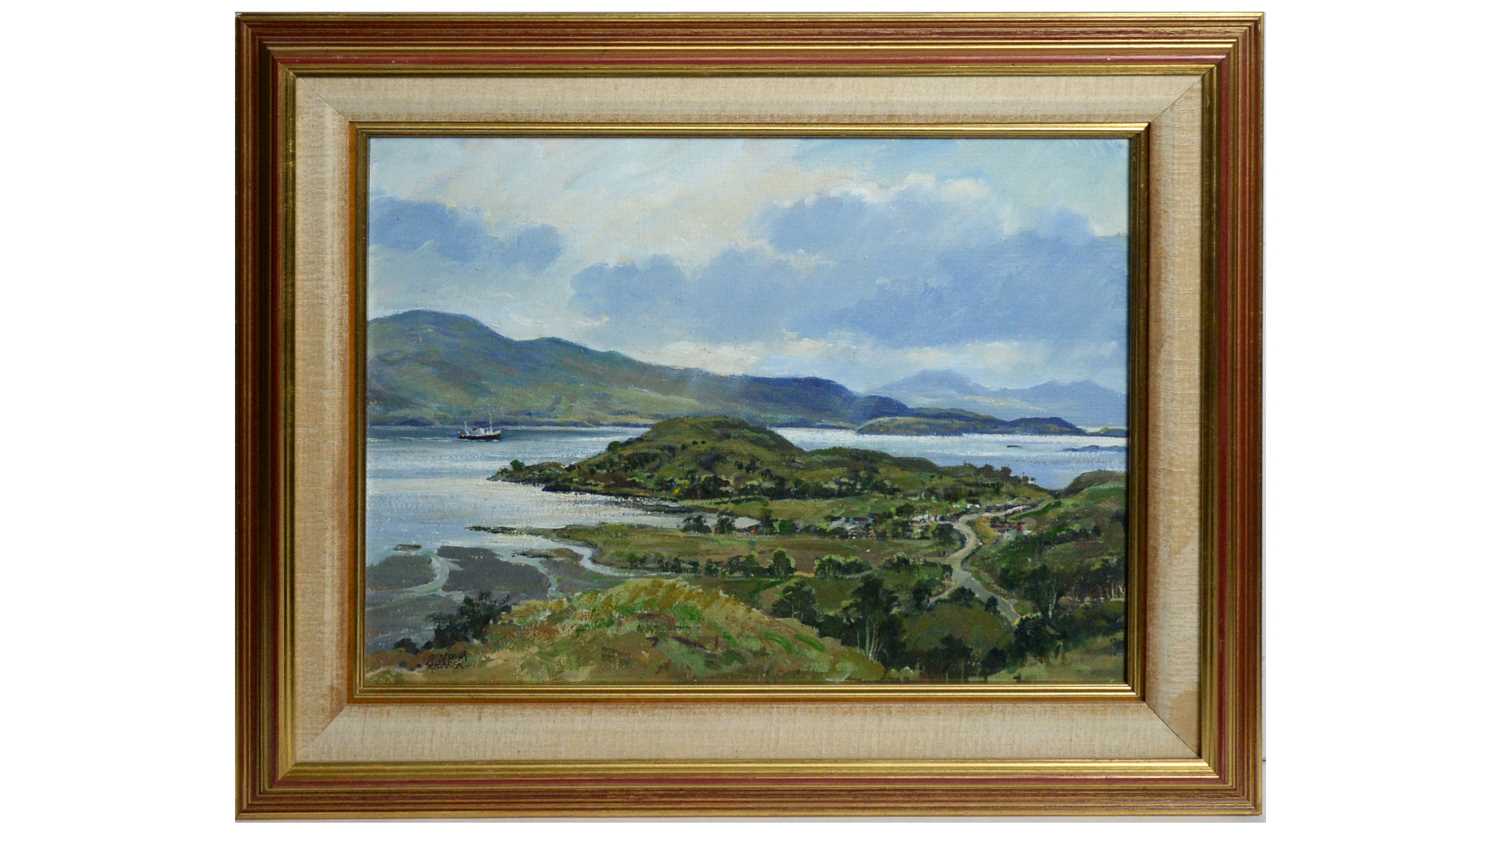 Lot 92 - Donald Shearer - Loch Alsh, inlet between the Isle of Skye and Northwest Scottish Highlands  | oil